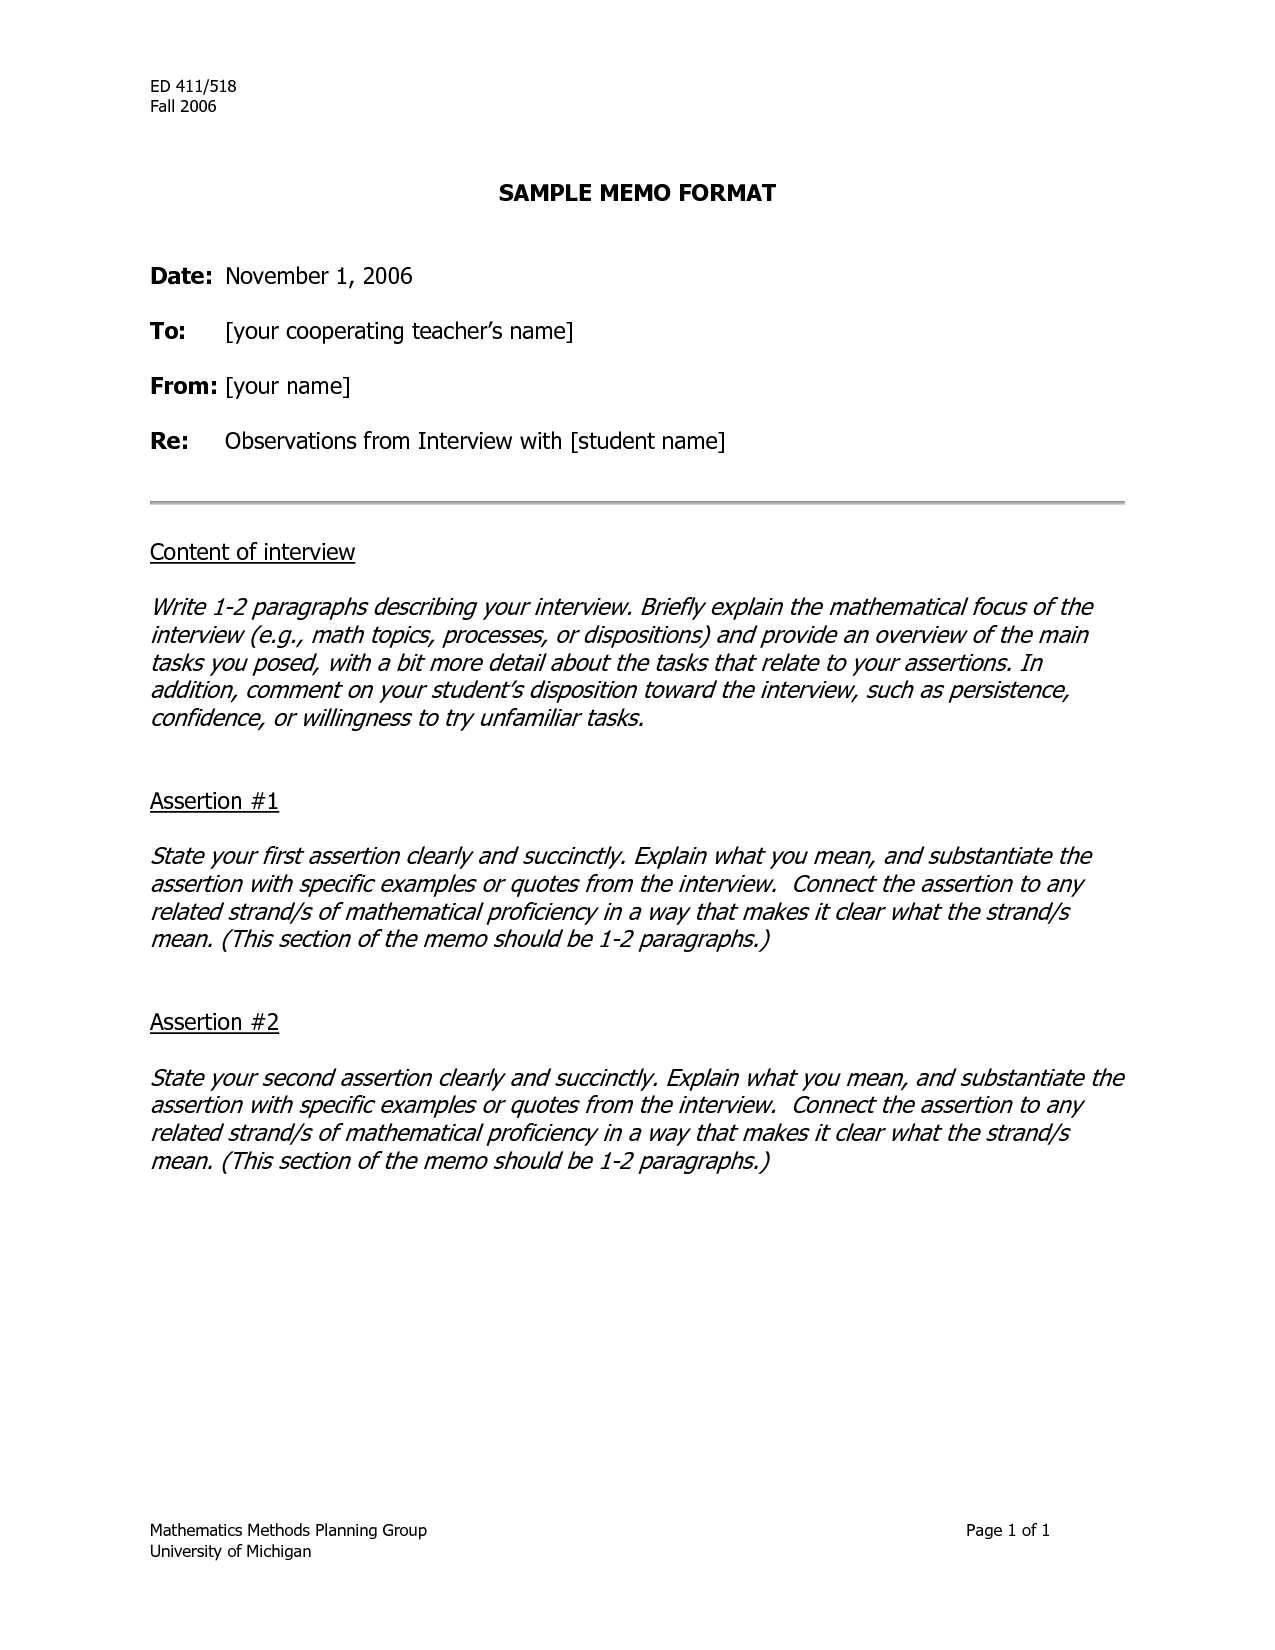 Sample Memo Templates - Google Search | Work Templates Within How To Write A Work Report Template